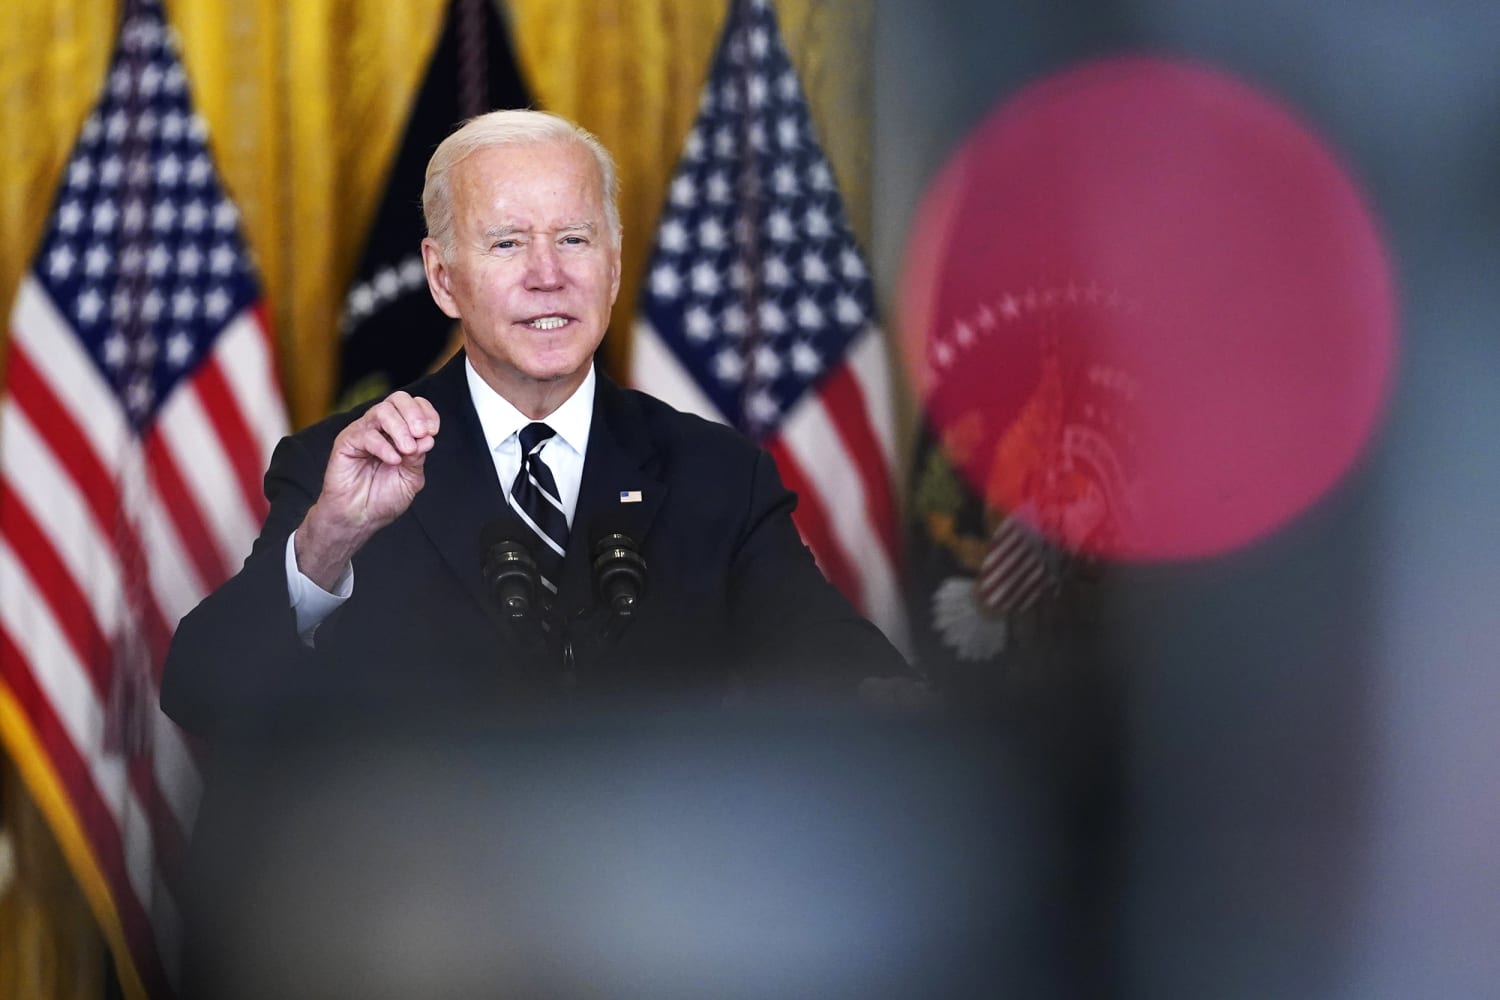 Biden promised to unite country. He’ll be lucky if he can unify half of it.